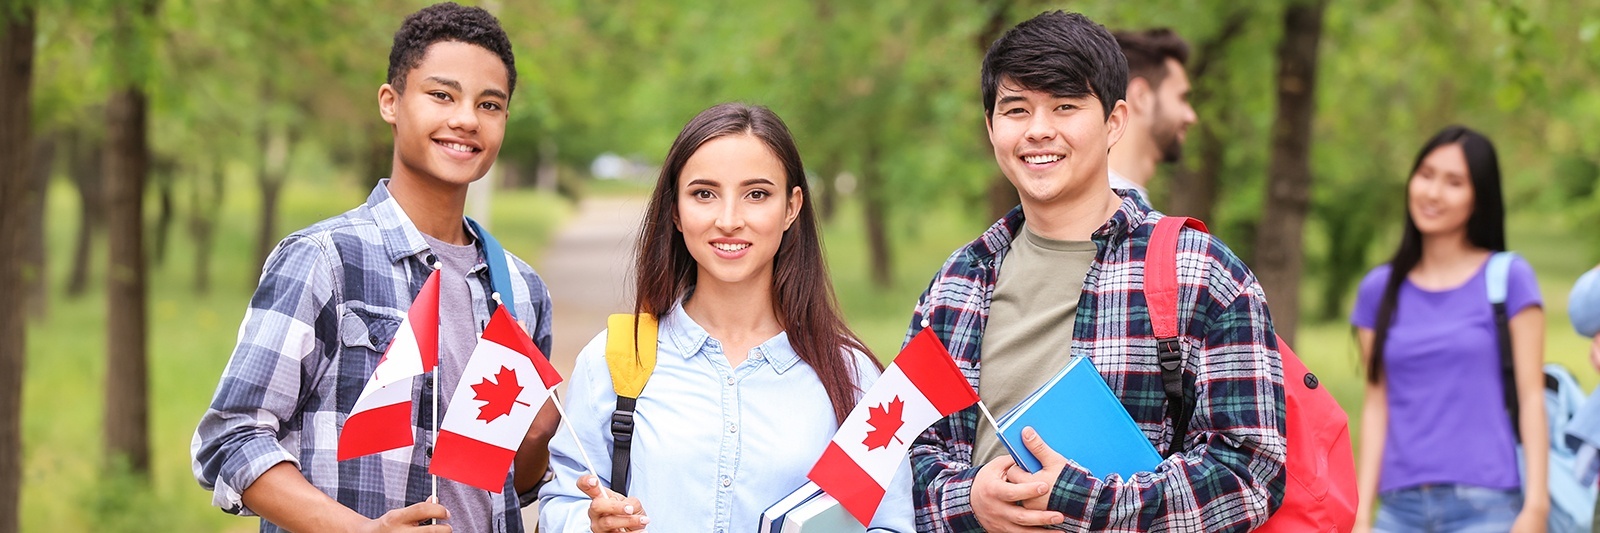 Secure your study permit and visa with the support of Canadian Immigration Consultants to pursue your education in Canada